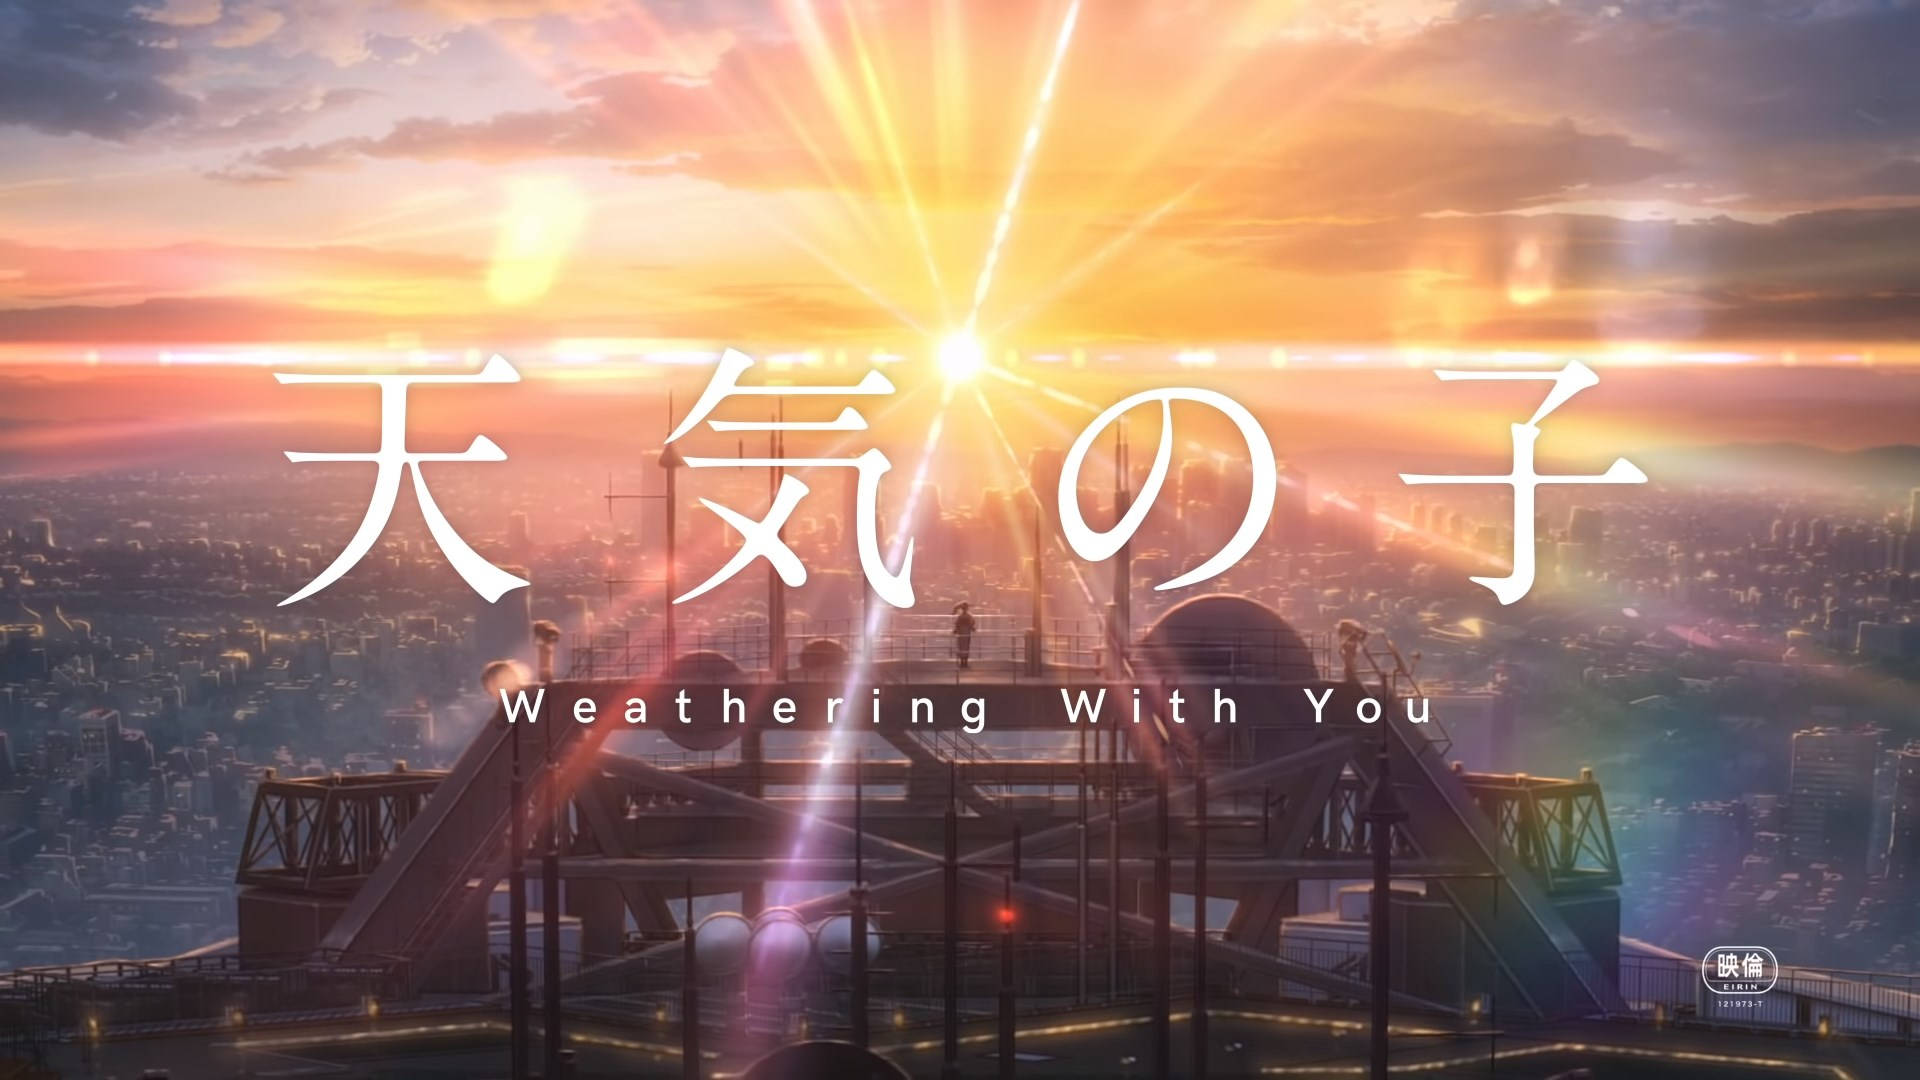 Weathering With You Sunset Poster Background